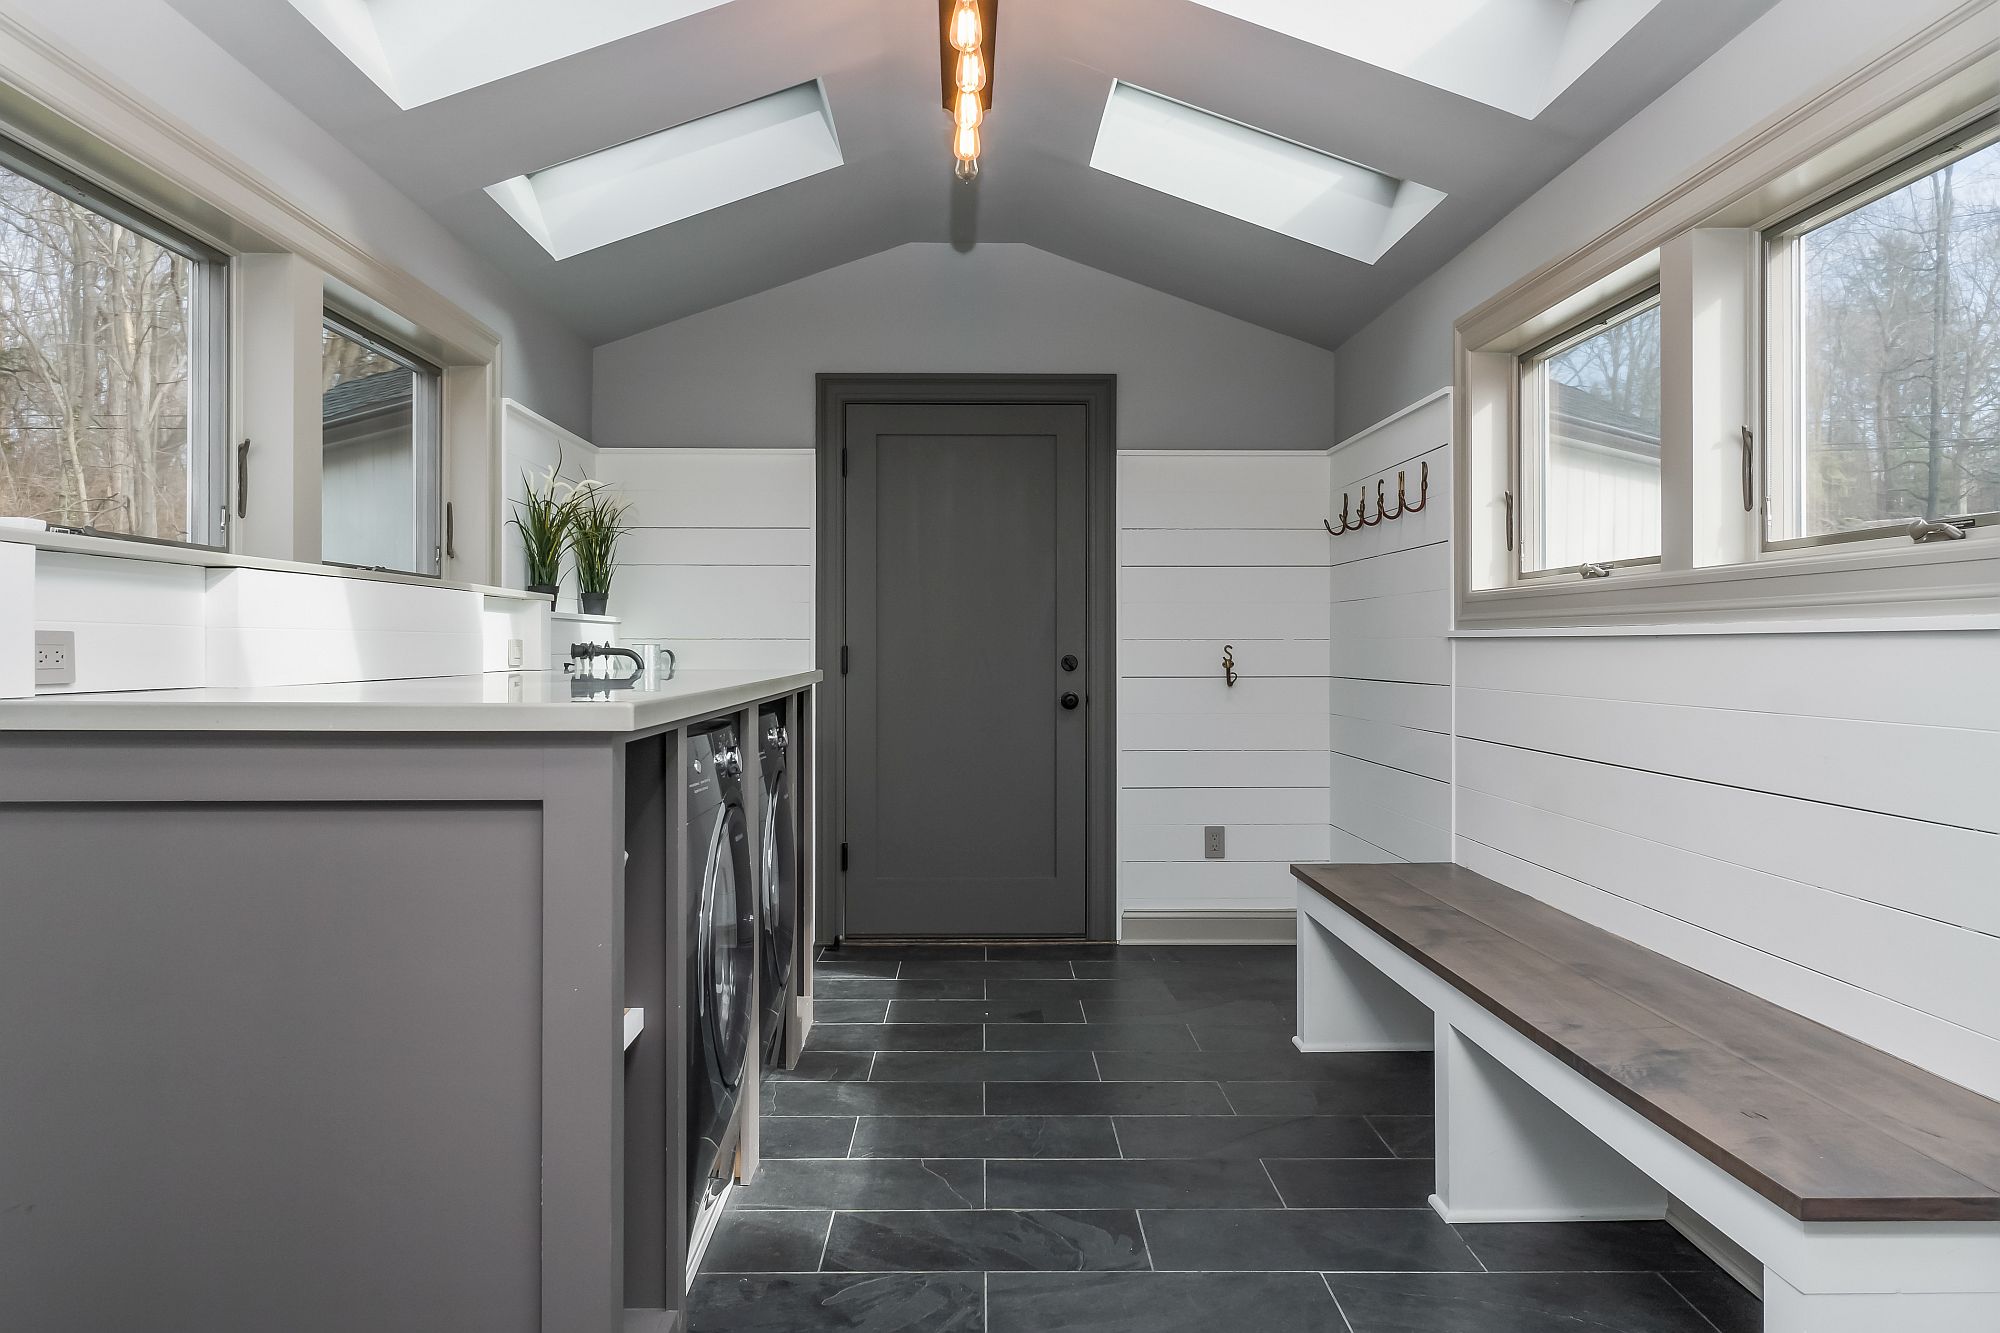 Laundry area and mud room in white and gray for the modern home